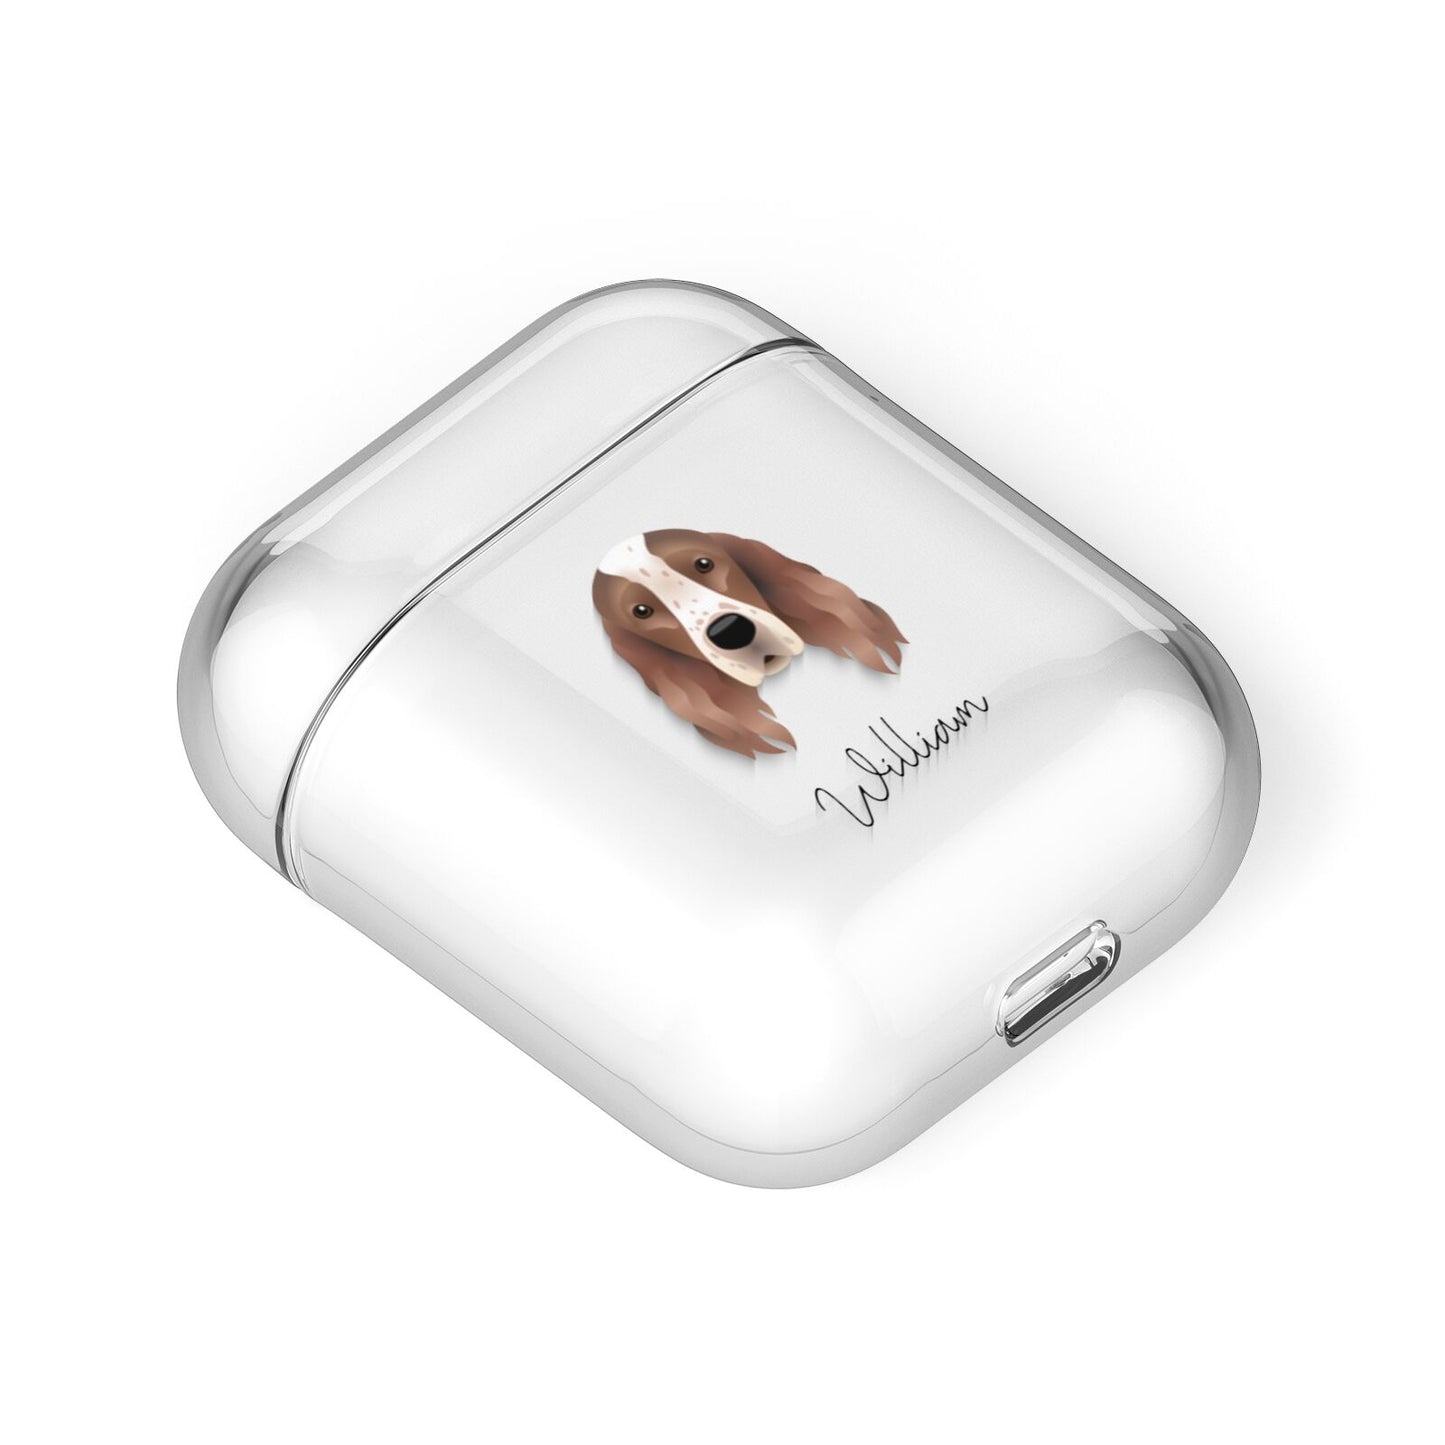 Irish Red White Setter Personalised AirPods Case Laid Flat